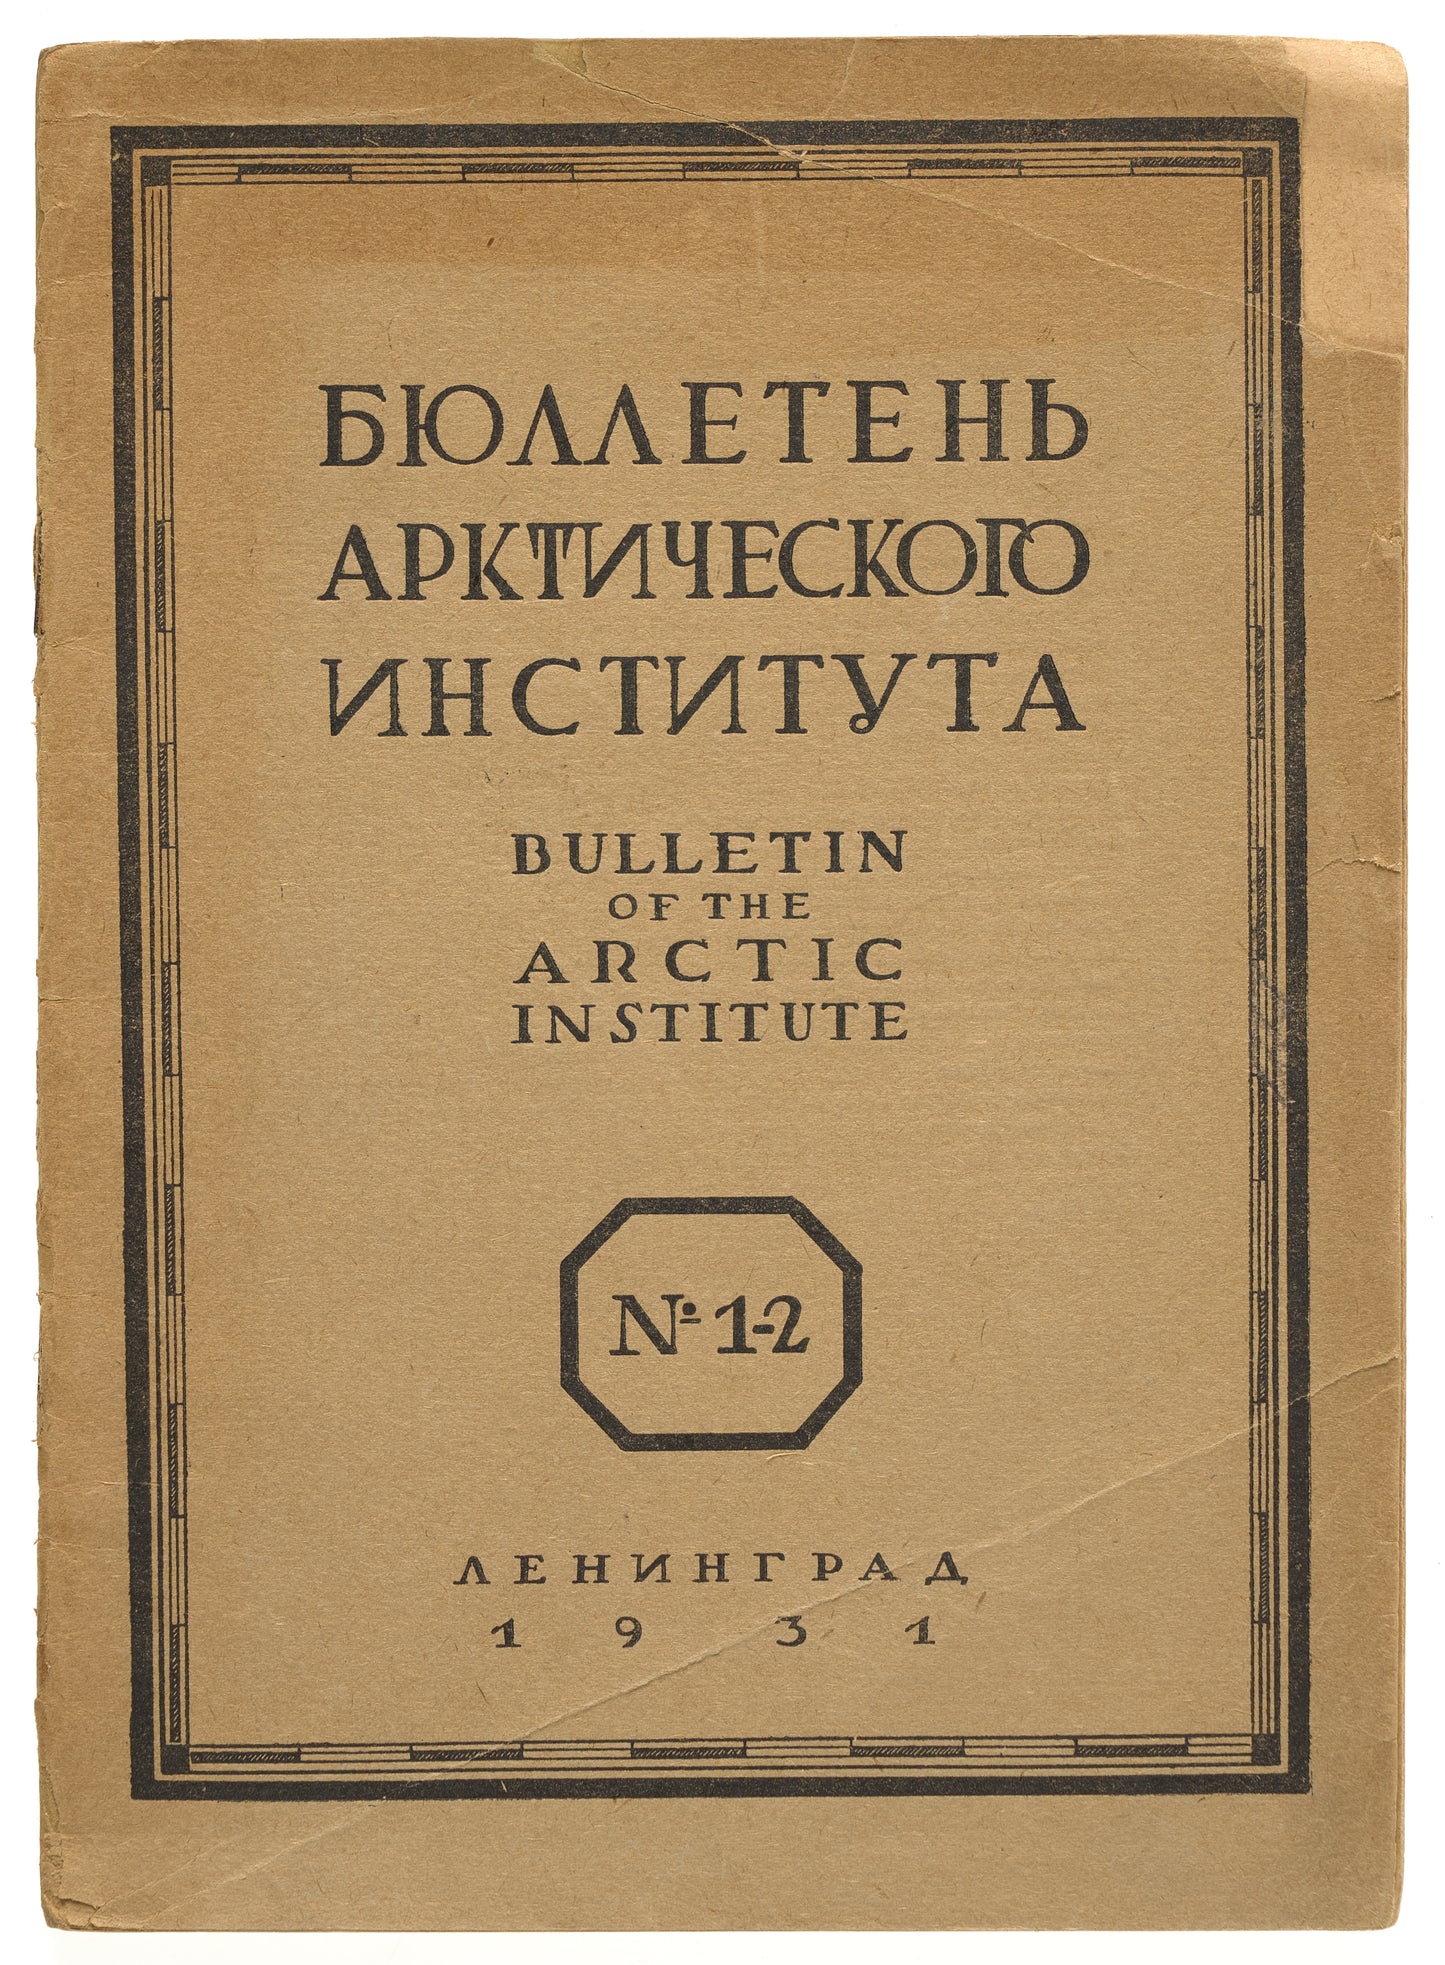 Bulletin of the Arctic Institute. First issue.